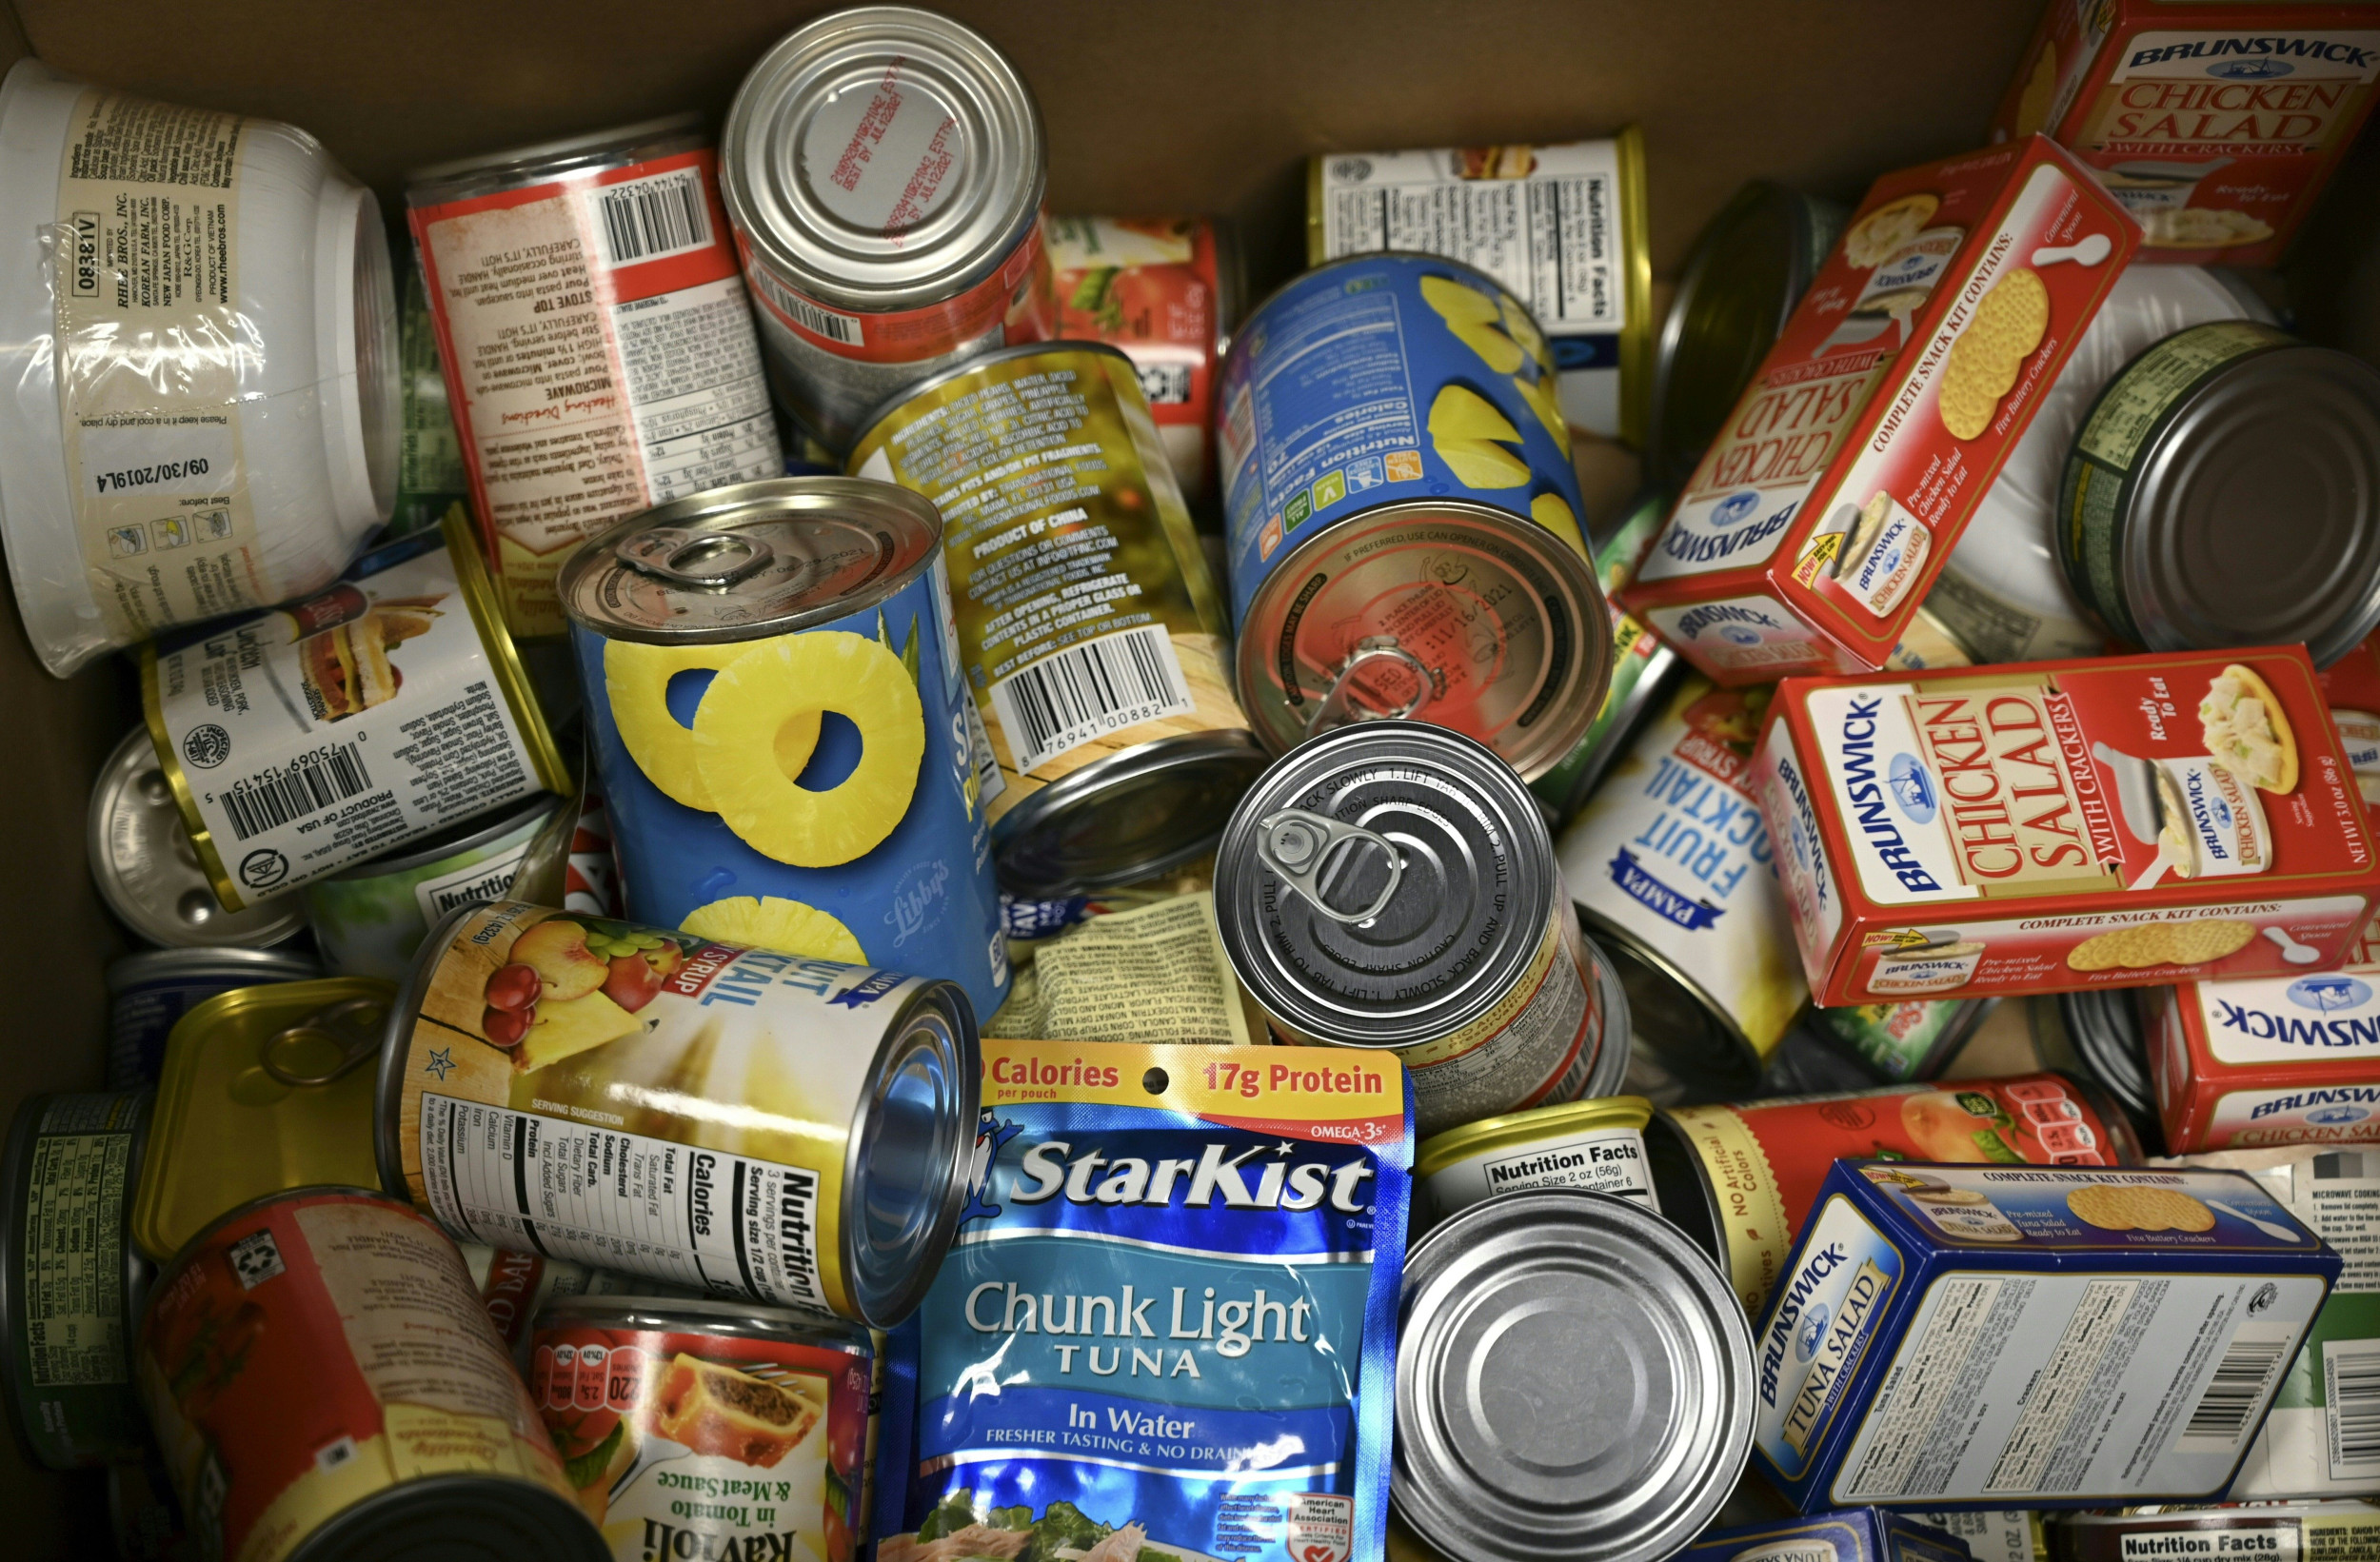 The 10 Best Canned Foods to Stockpile for Survival